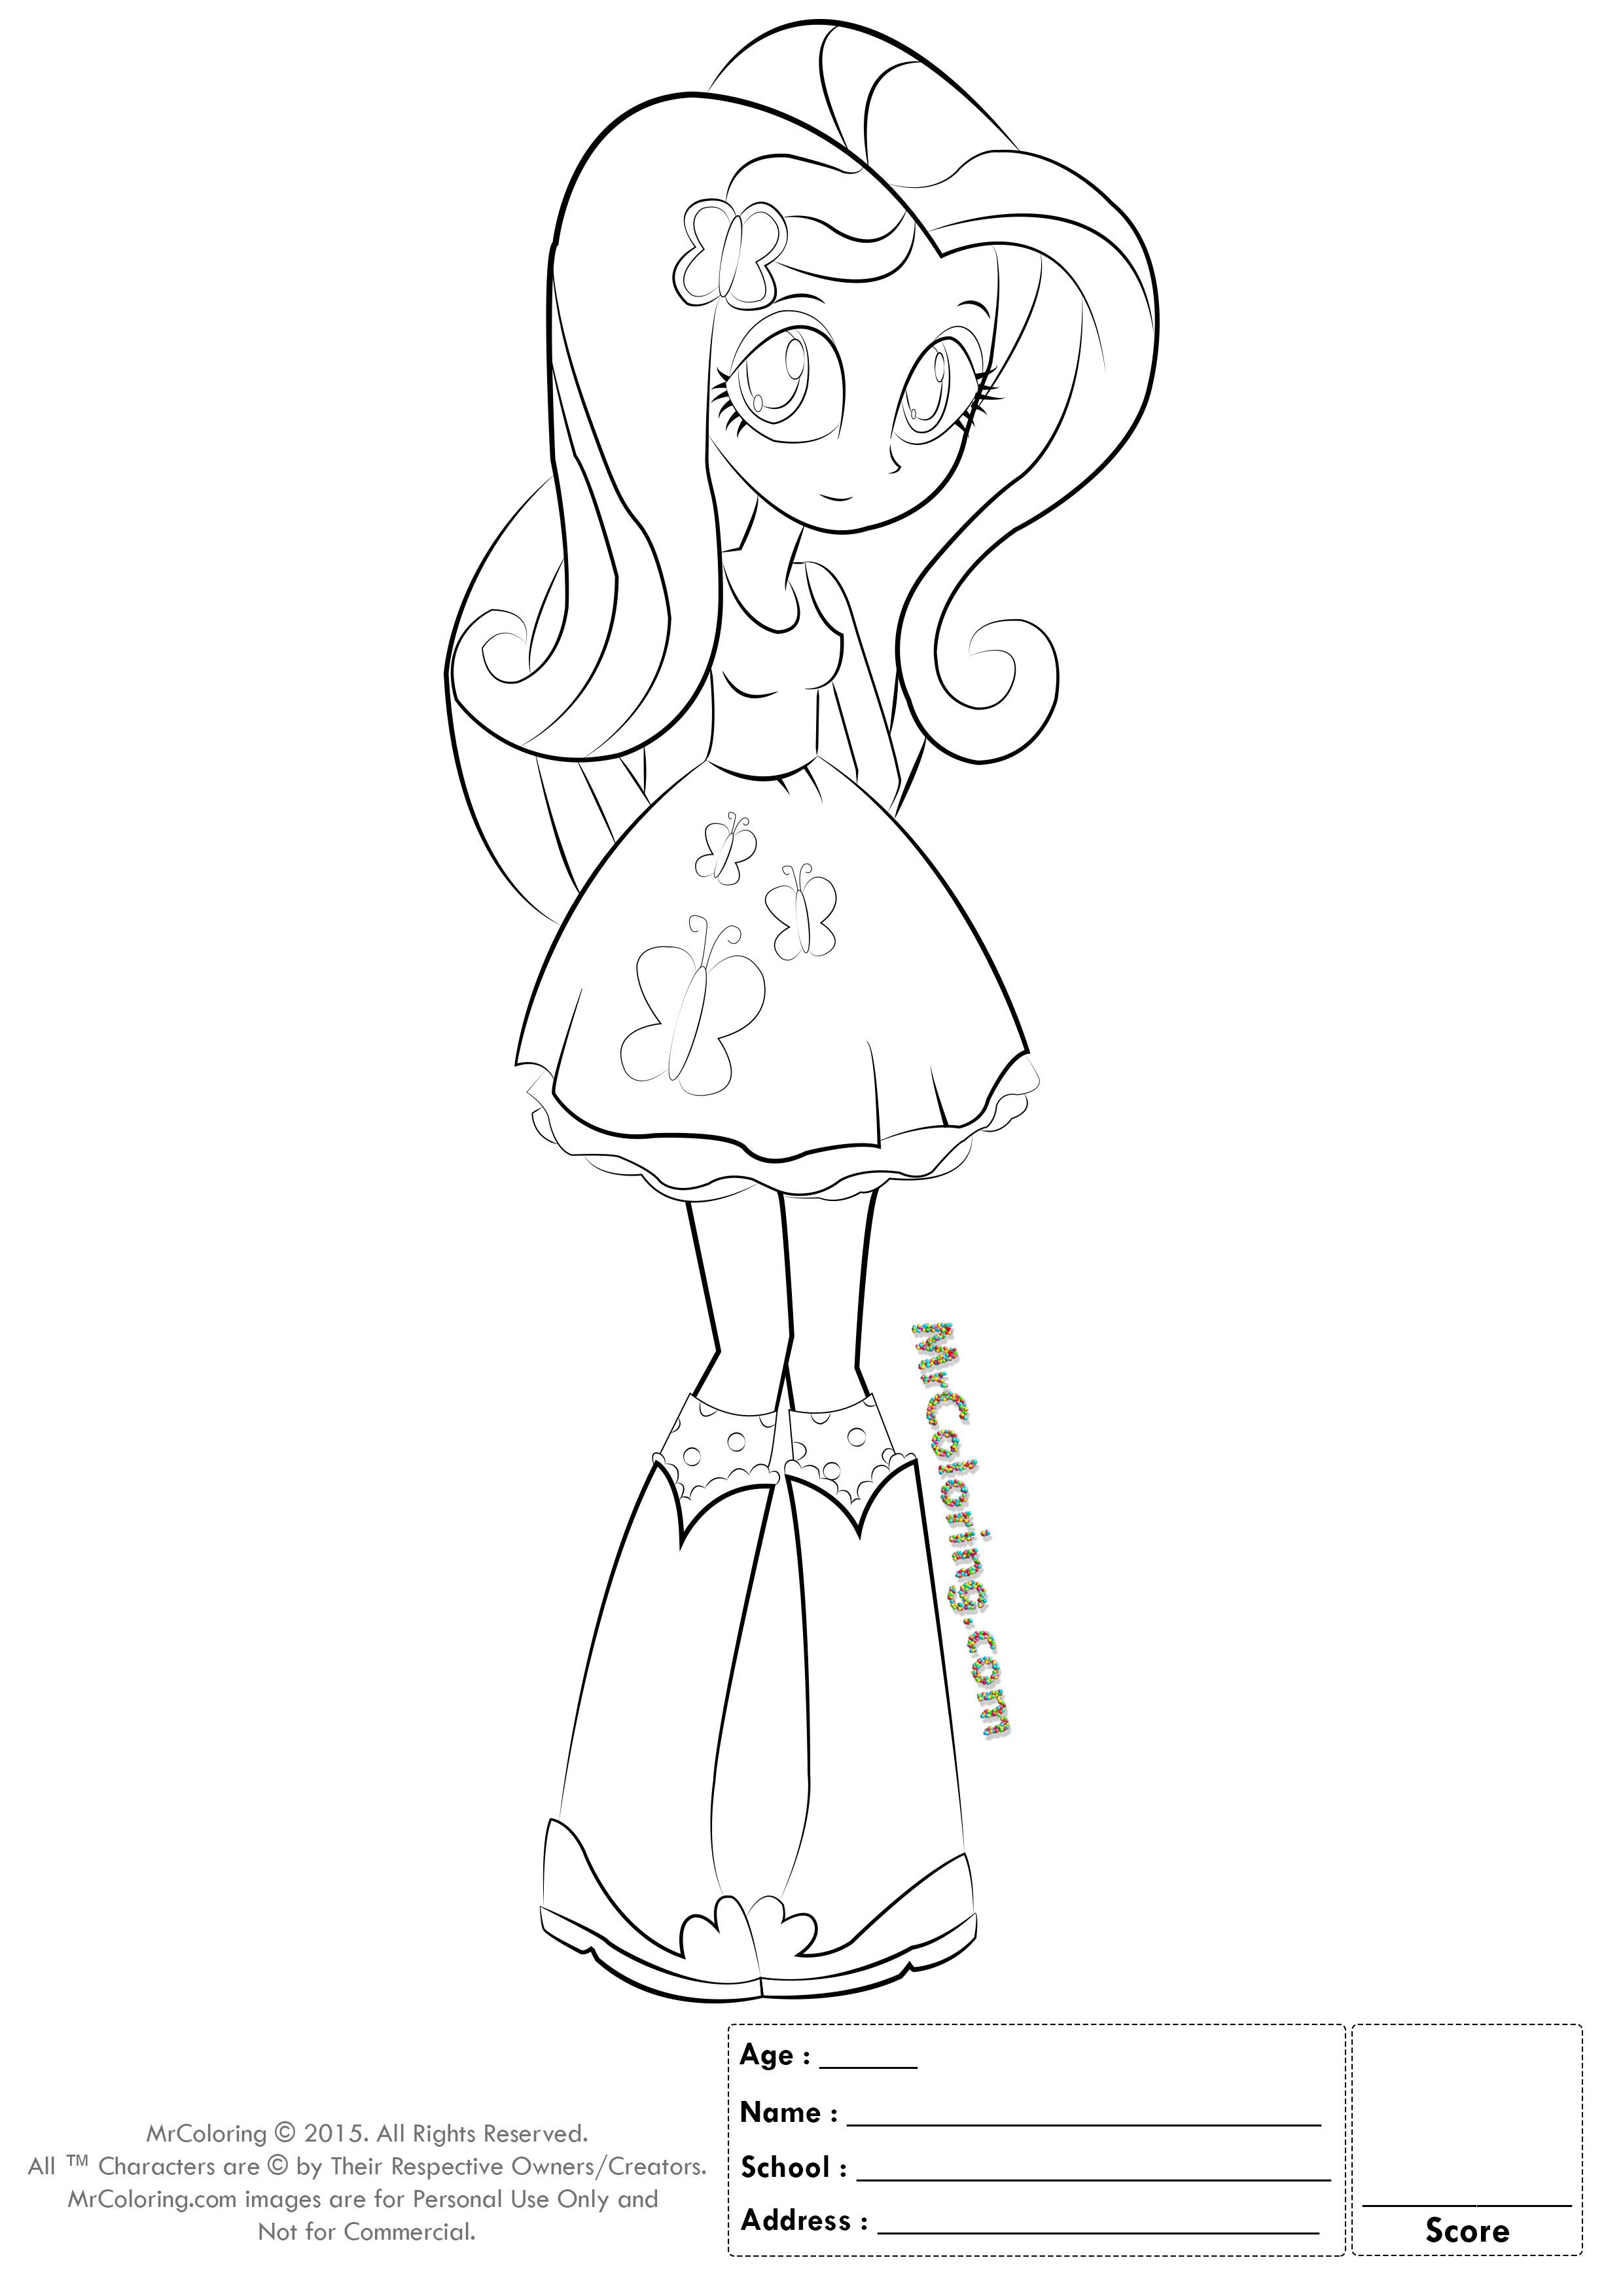 Fluttershy Equestria Girl Coloring Pages
 Twilight Sparkle Equestria Girls Coloring Pages Coloring